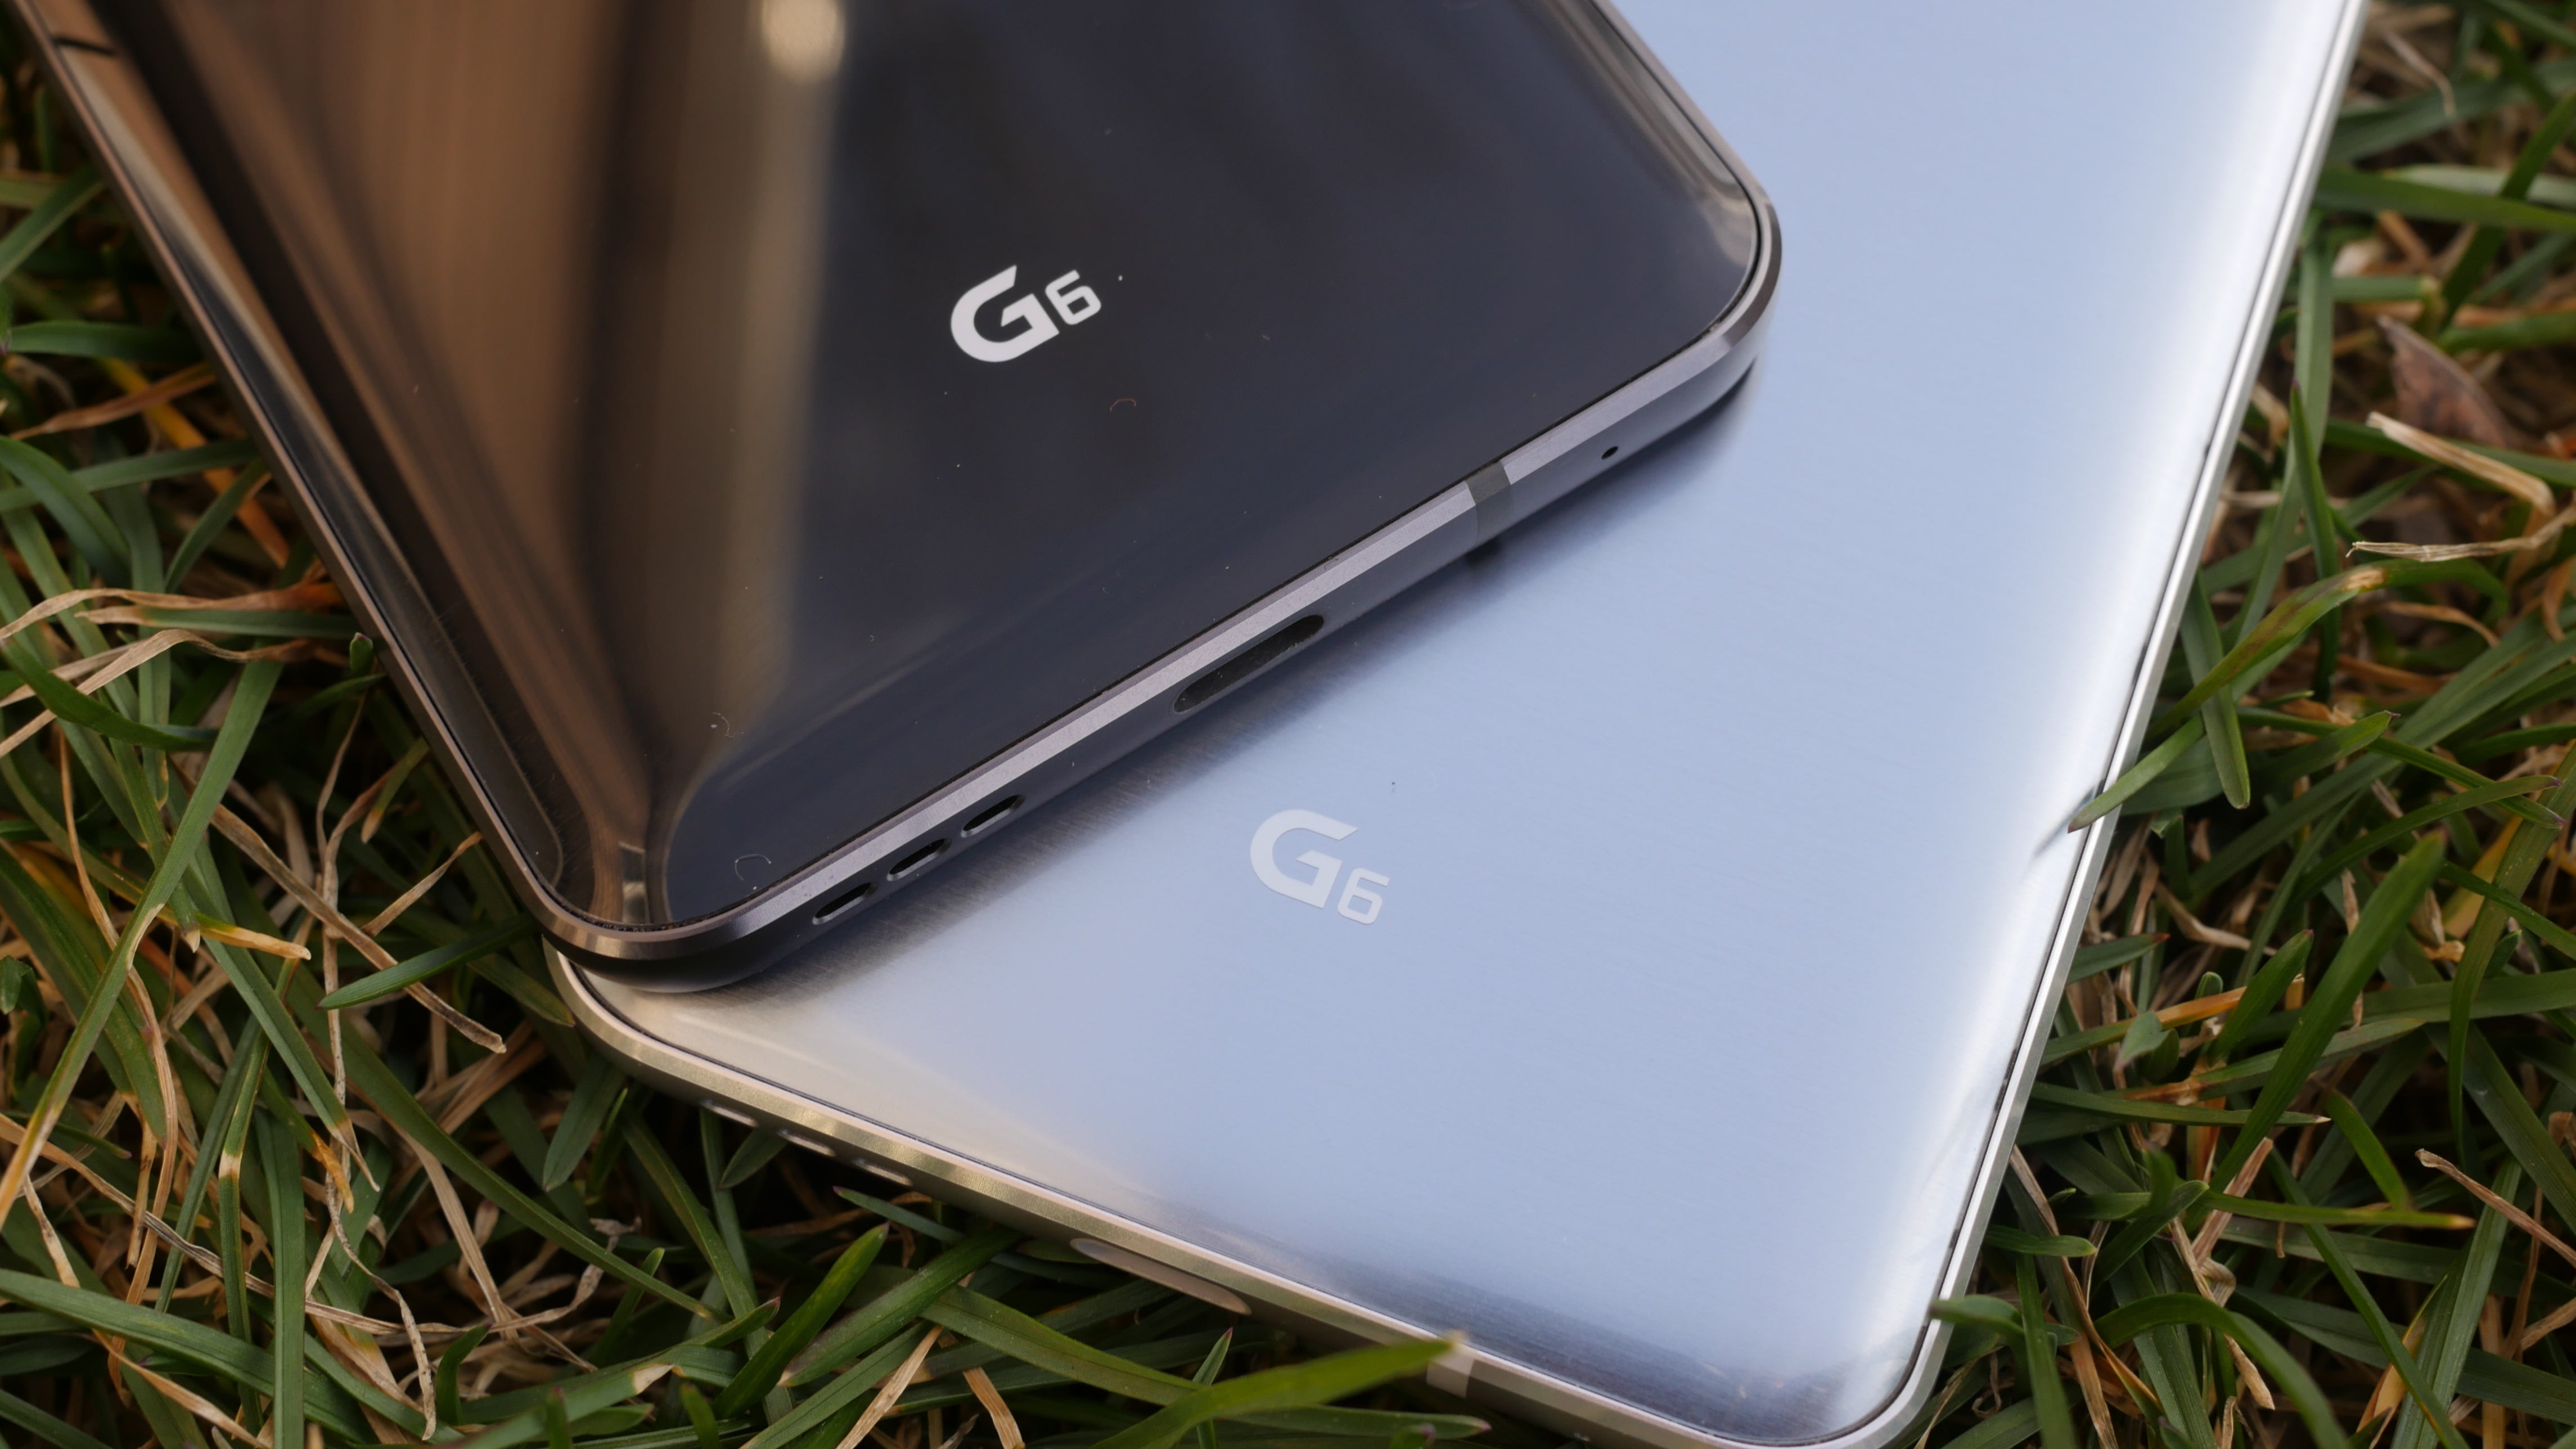 The G6 is a successful product, but LG&#039;s mobile division needs more to become profitable - LG&#039;s Q2 profits lower than expected, struggling mobile division to blame